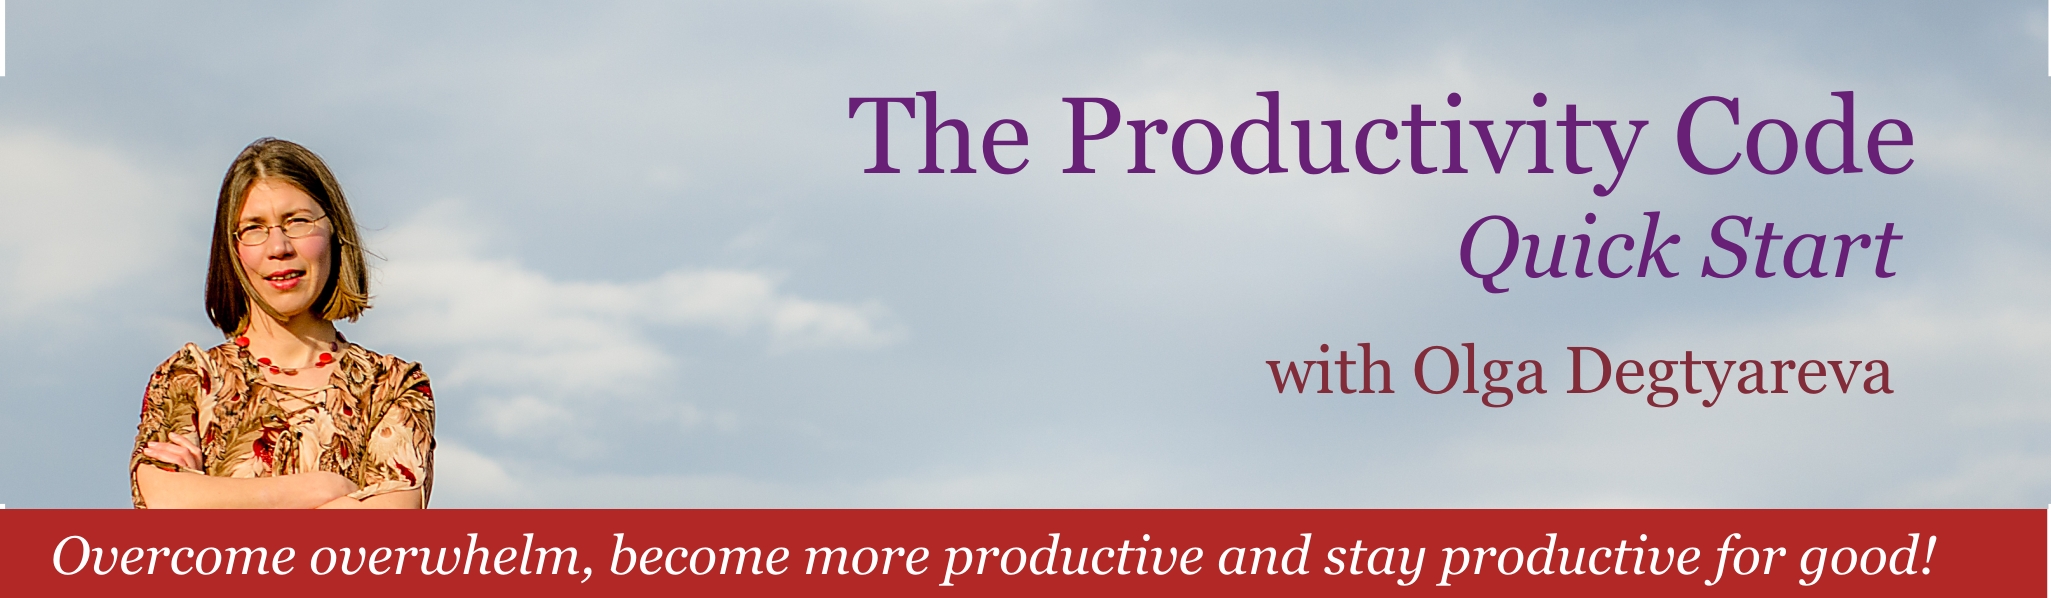 the Productivity Code Quick Start Online Course